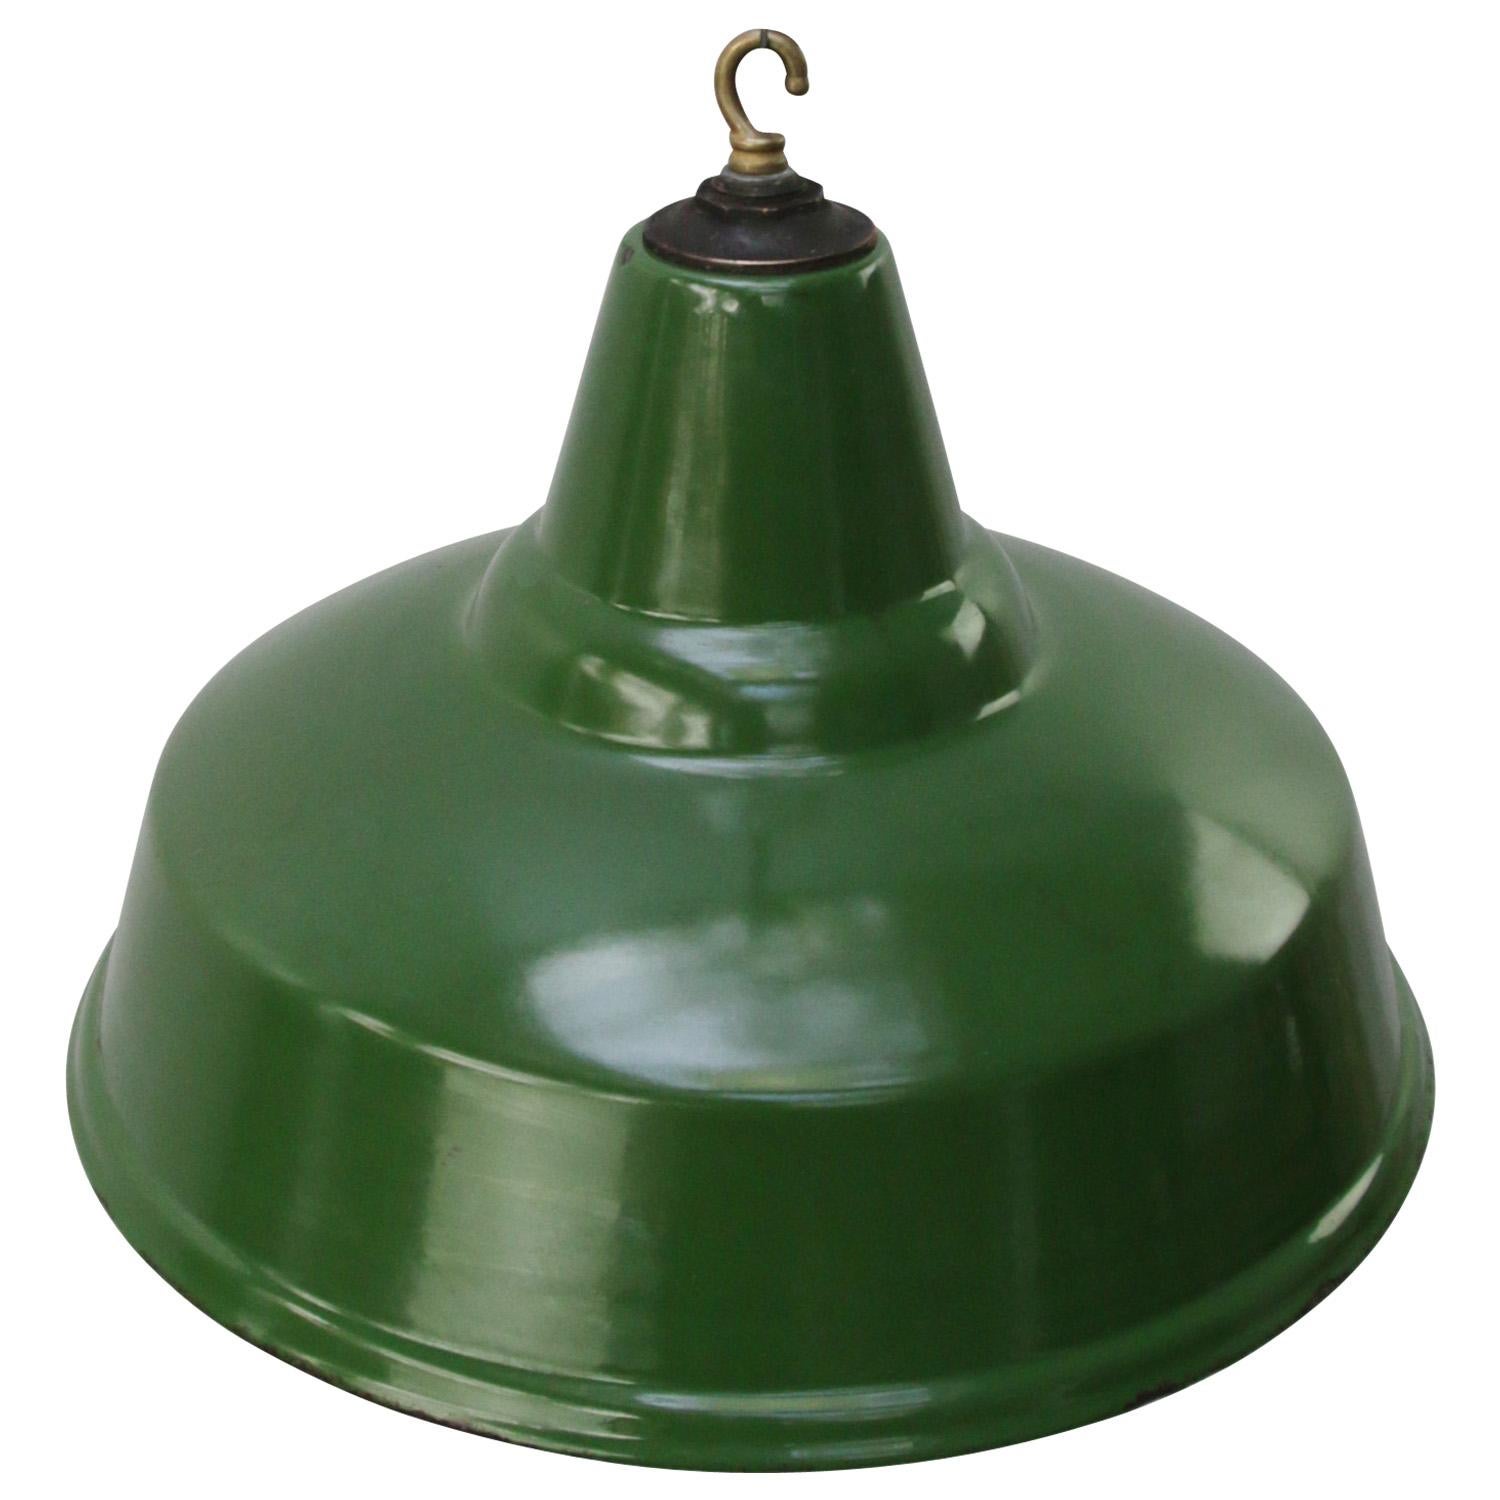 Vintage British green enamel industrial pendant lamp
white interior

Weight: 2.10 kg / 4.6 lb

Priced per individual item. All lamps have been made suitable by international standards for incandescent light bulbs, energy-efficient and LED bulbs.